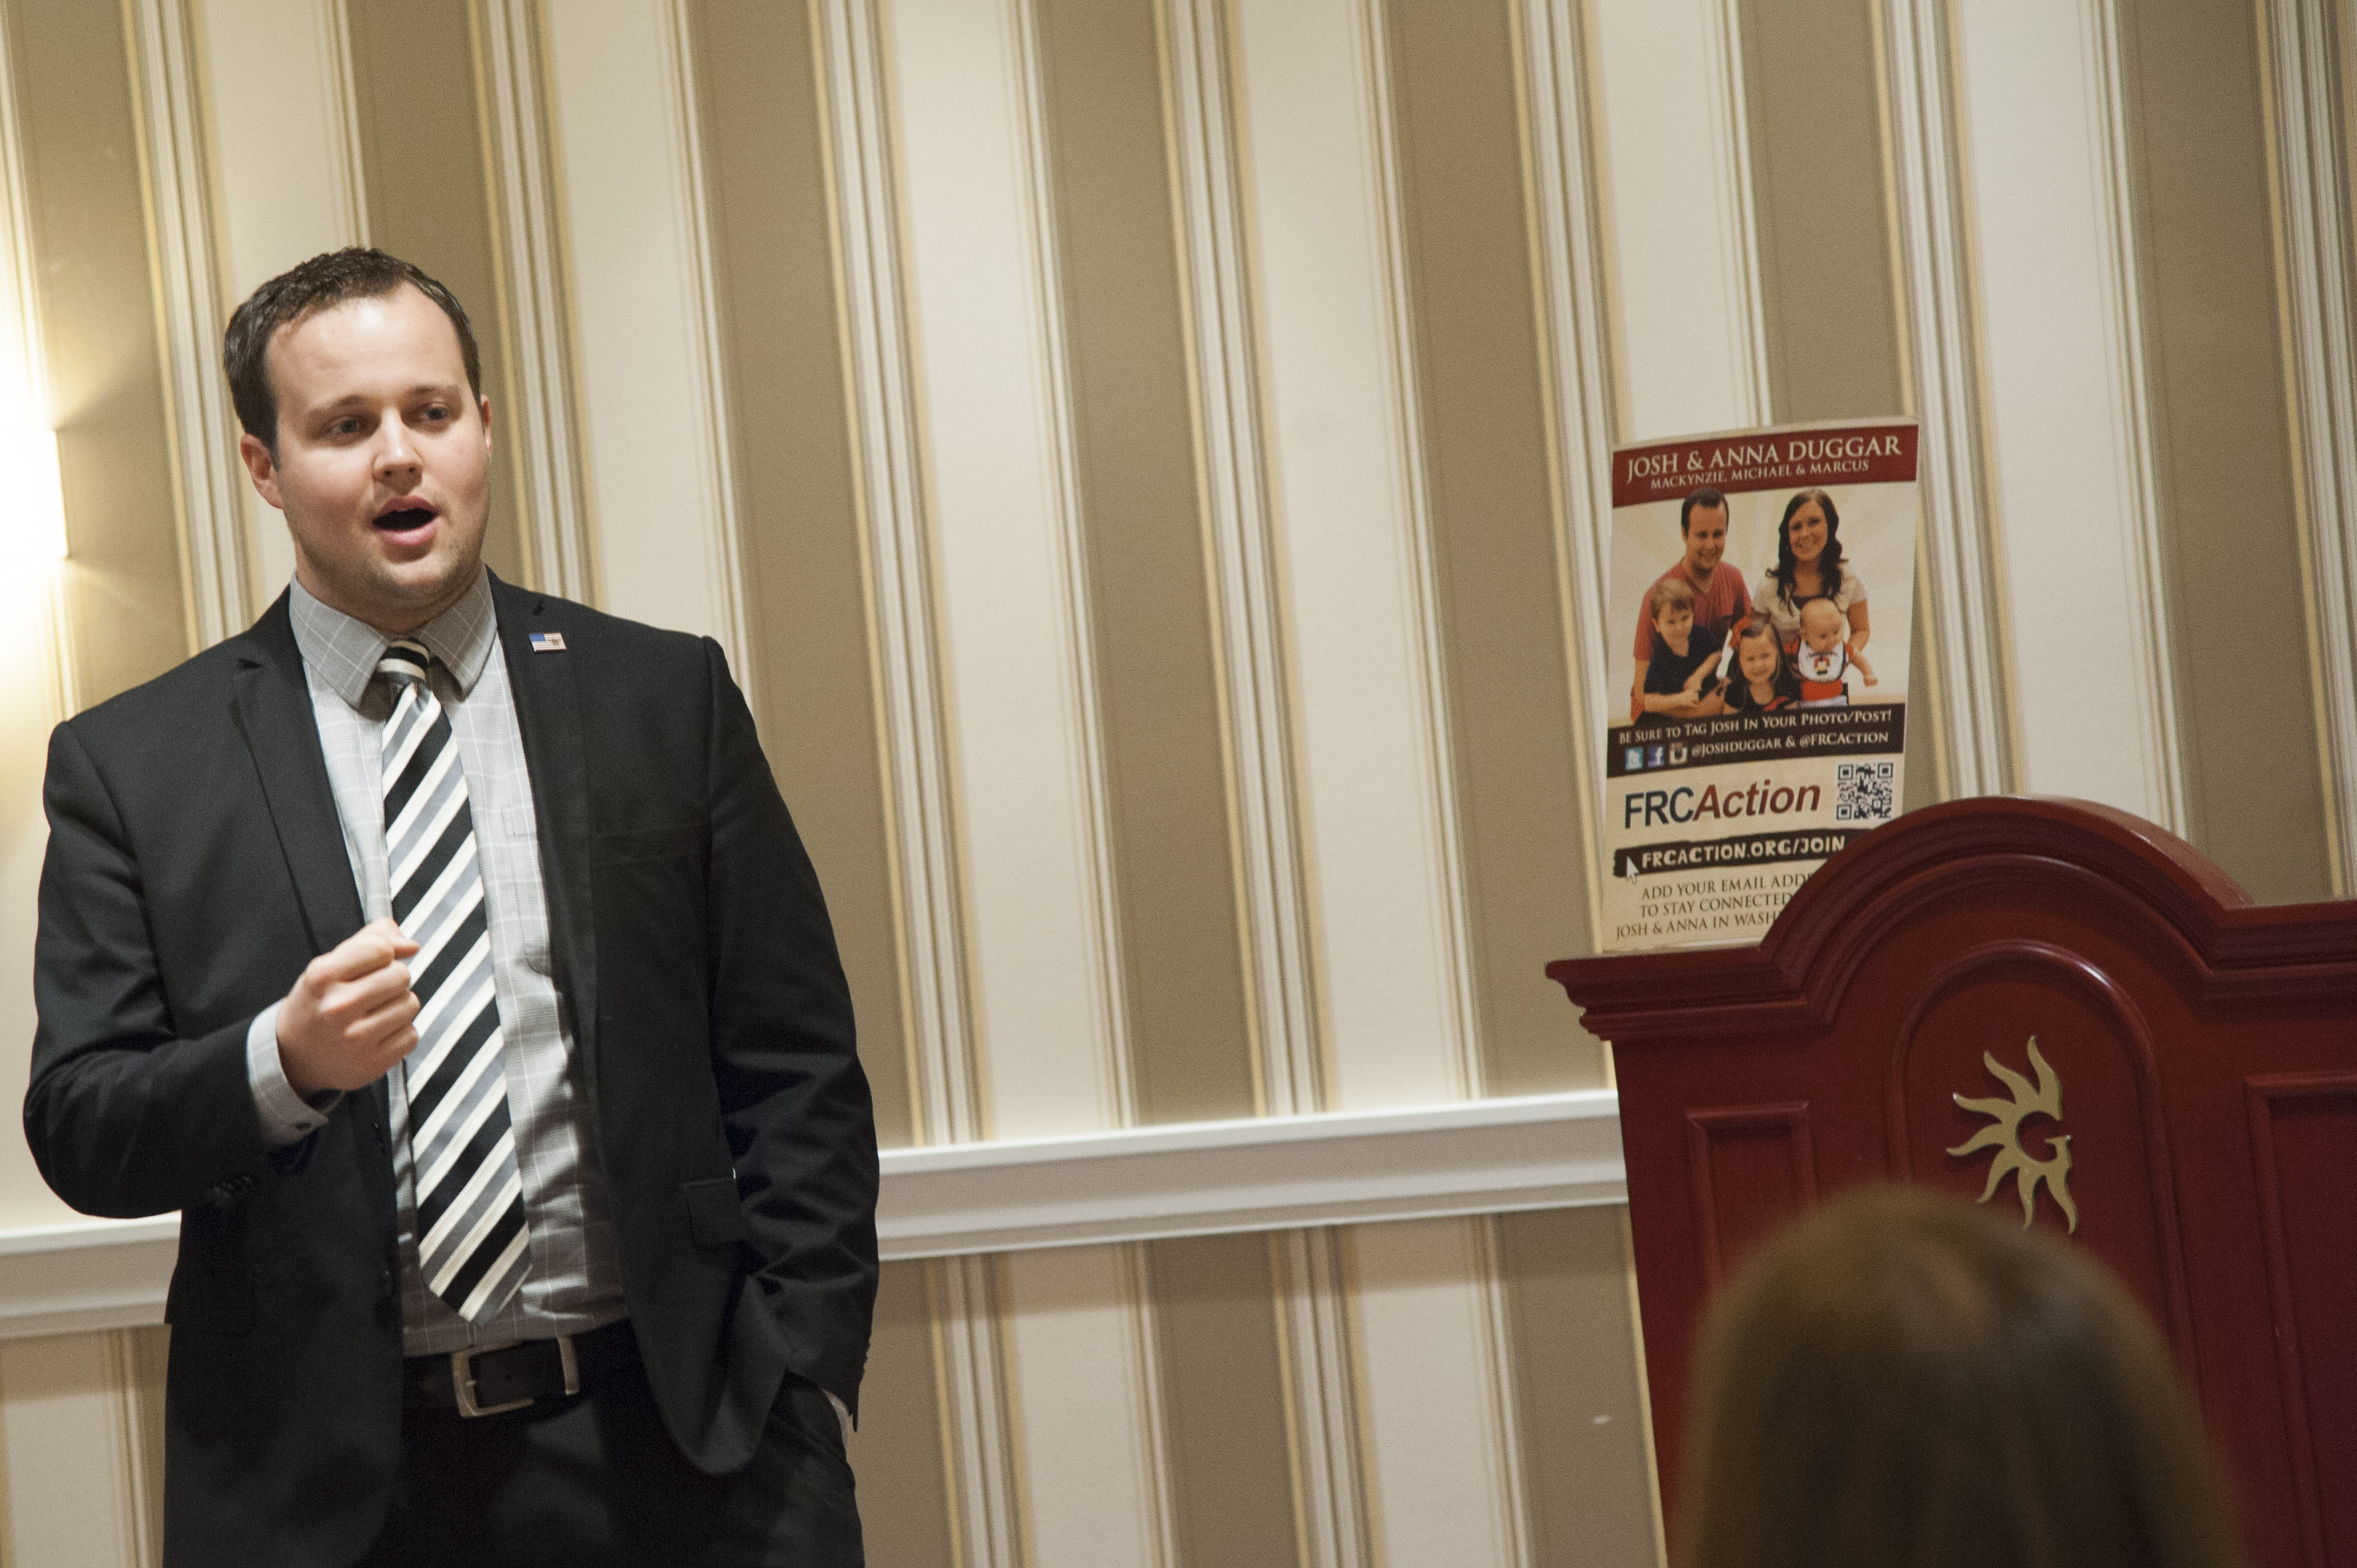 Josh Duggar, who was recently sentenced to 151 months in federal prison, speaking at an event in 2015